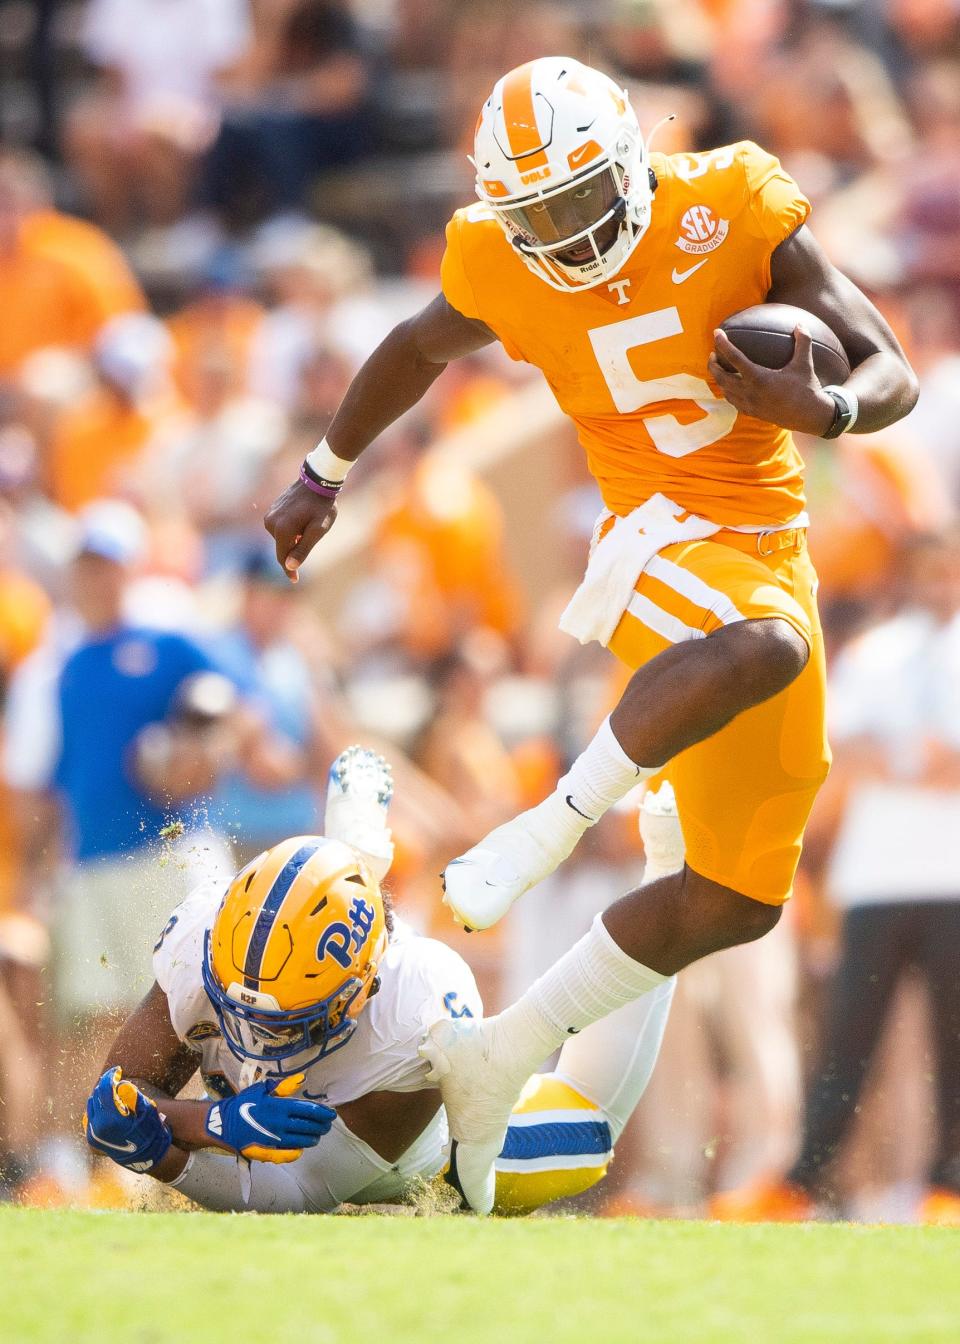 Tennessee quarterback Hendon Hooker (5) avoids a tackle during a football game between the Tennessee Volunteers and the Pittsburgh Panthers in Neyland Stadium on Saturday, Sept. 11, 2021. 